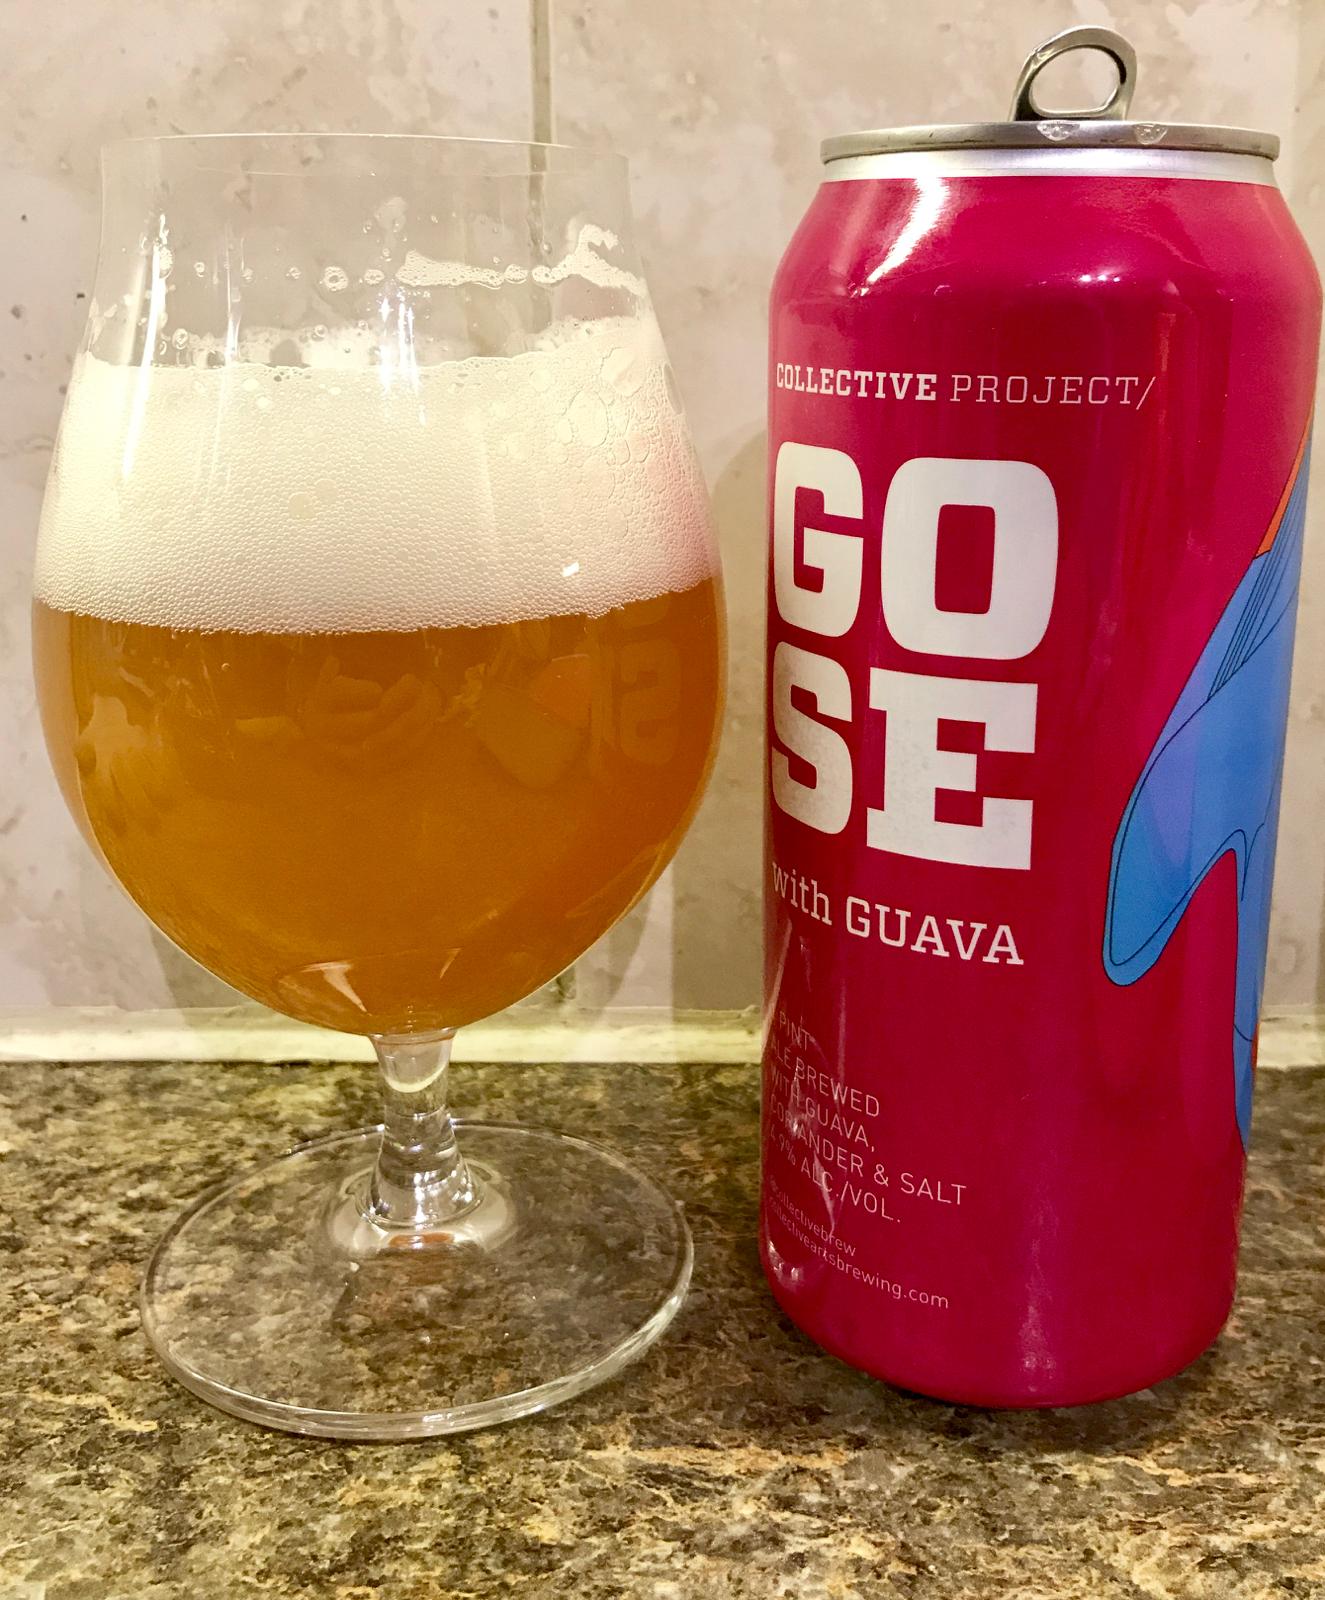 Collective Project: Gose with Guava